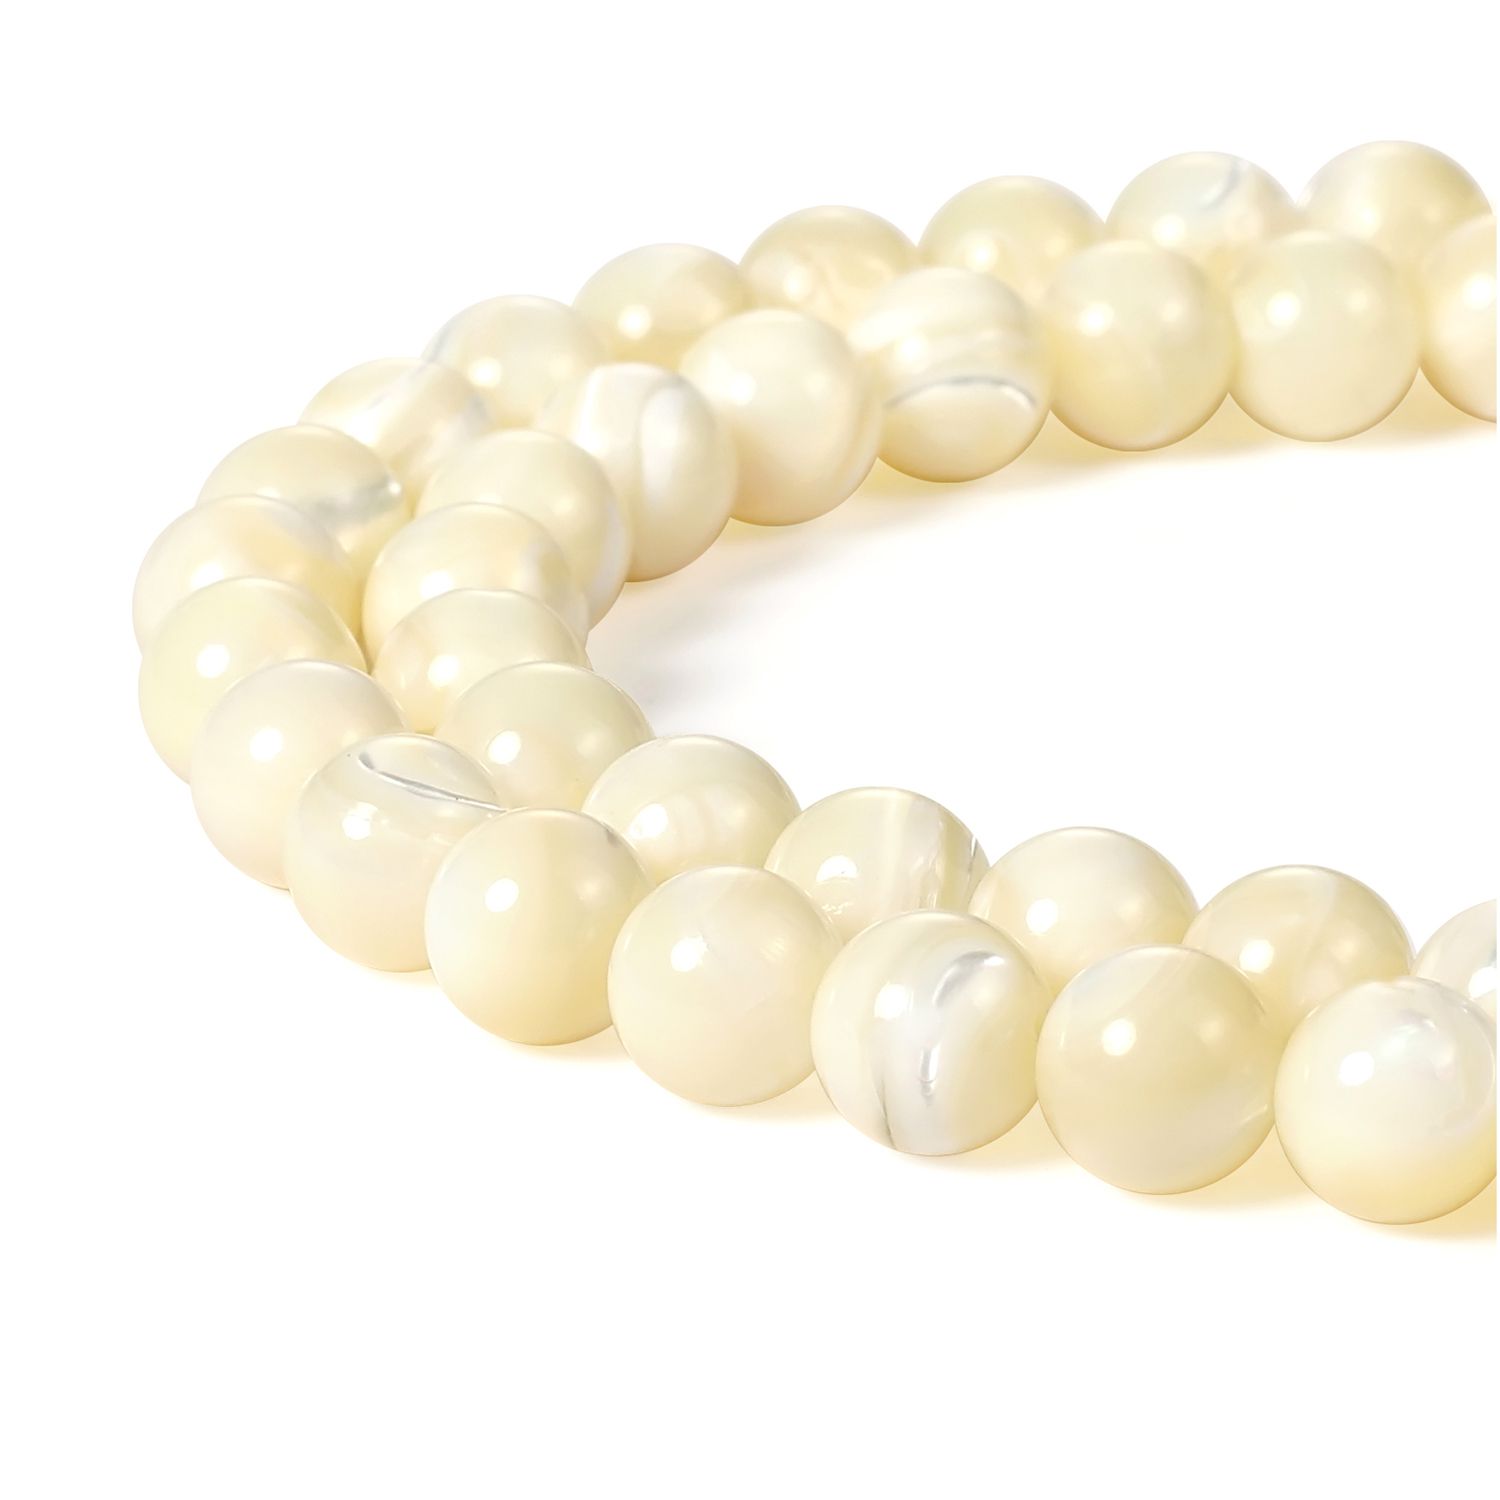 BEADNOVA Natural White Mother of Pearl Shell Beads Natural Crystal ...